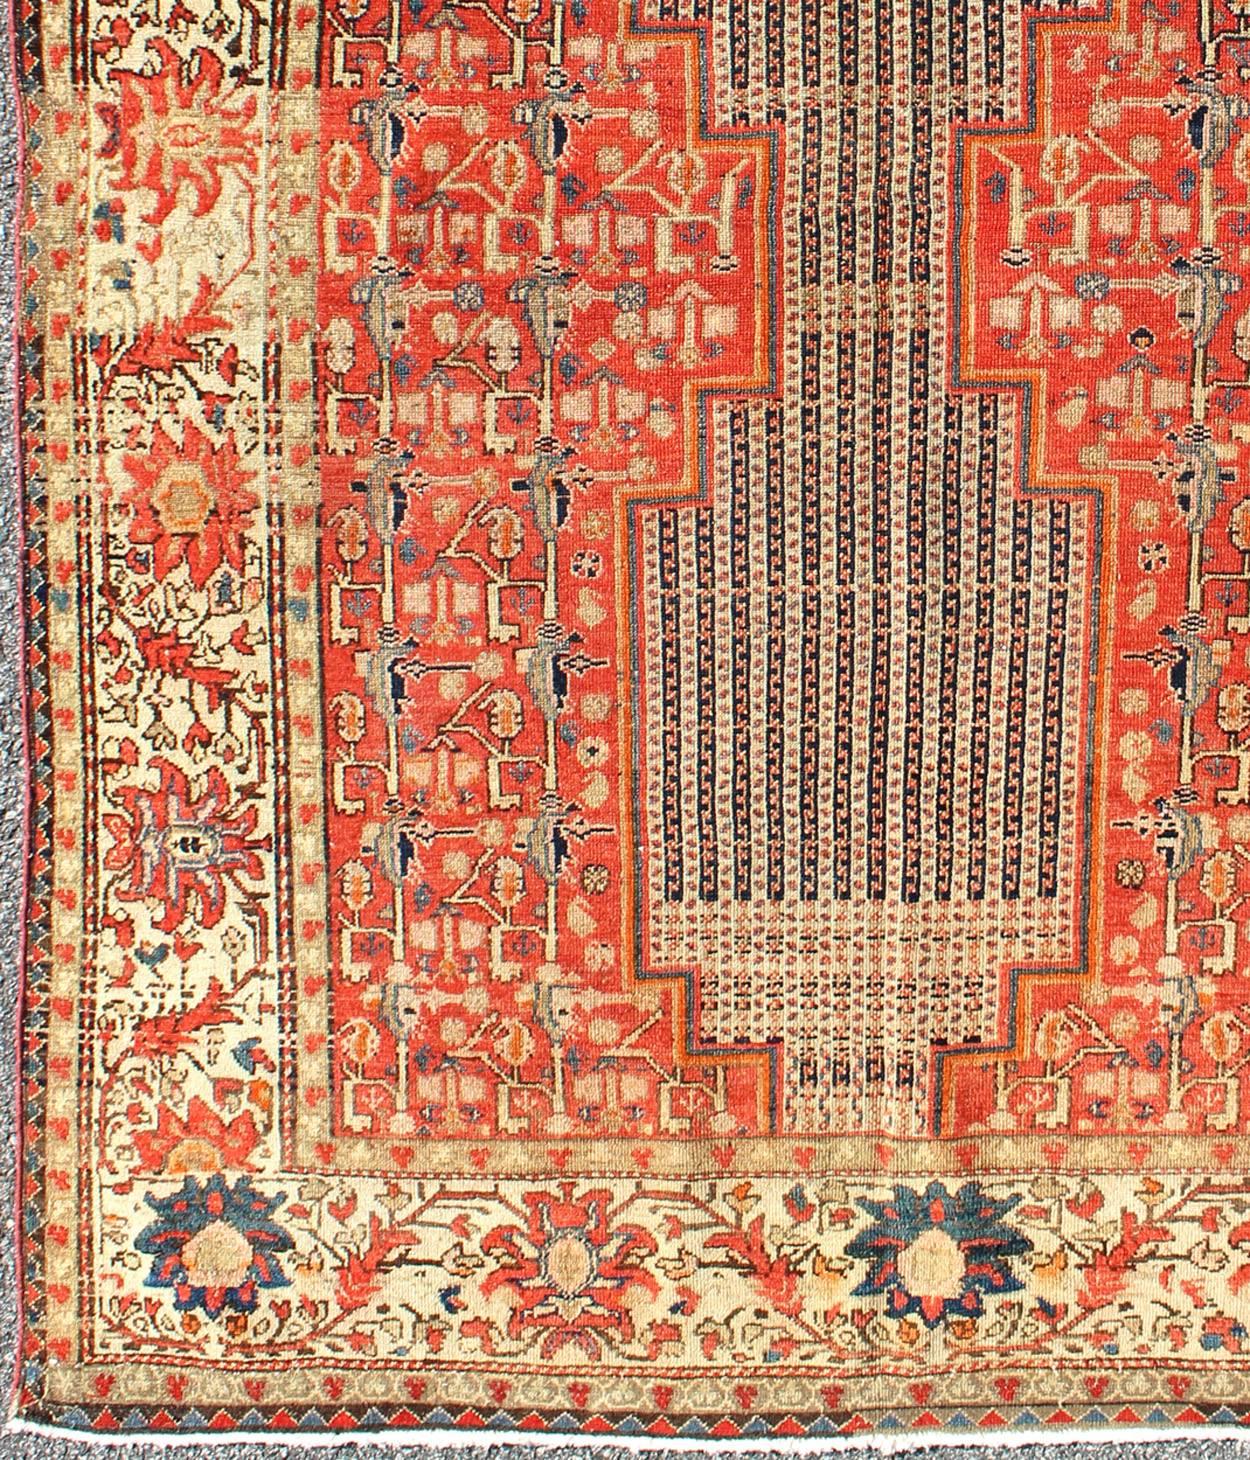 Mishan Malayer pieces are both rare and among the finest of Seneh and Malayer rugs. Made in the late 19th Century, this rug carries an unusual design of double-bodied medallions, which are composed of alternating pinstriped patterns. Designs of lush